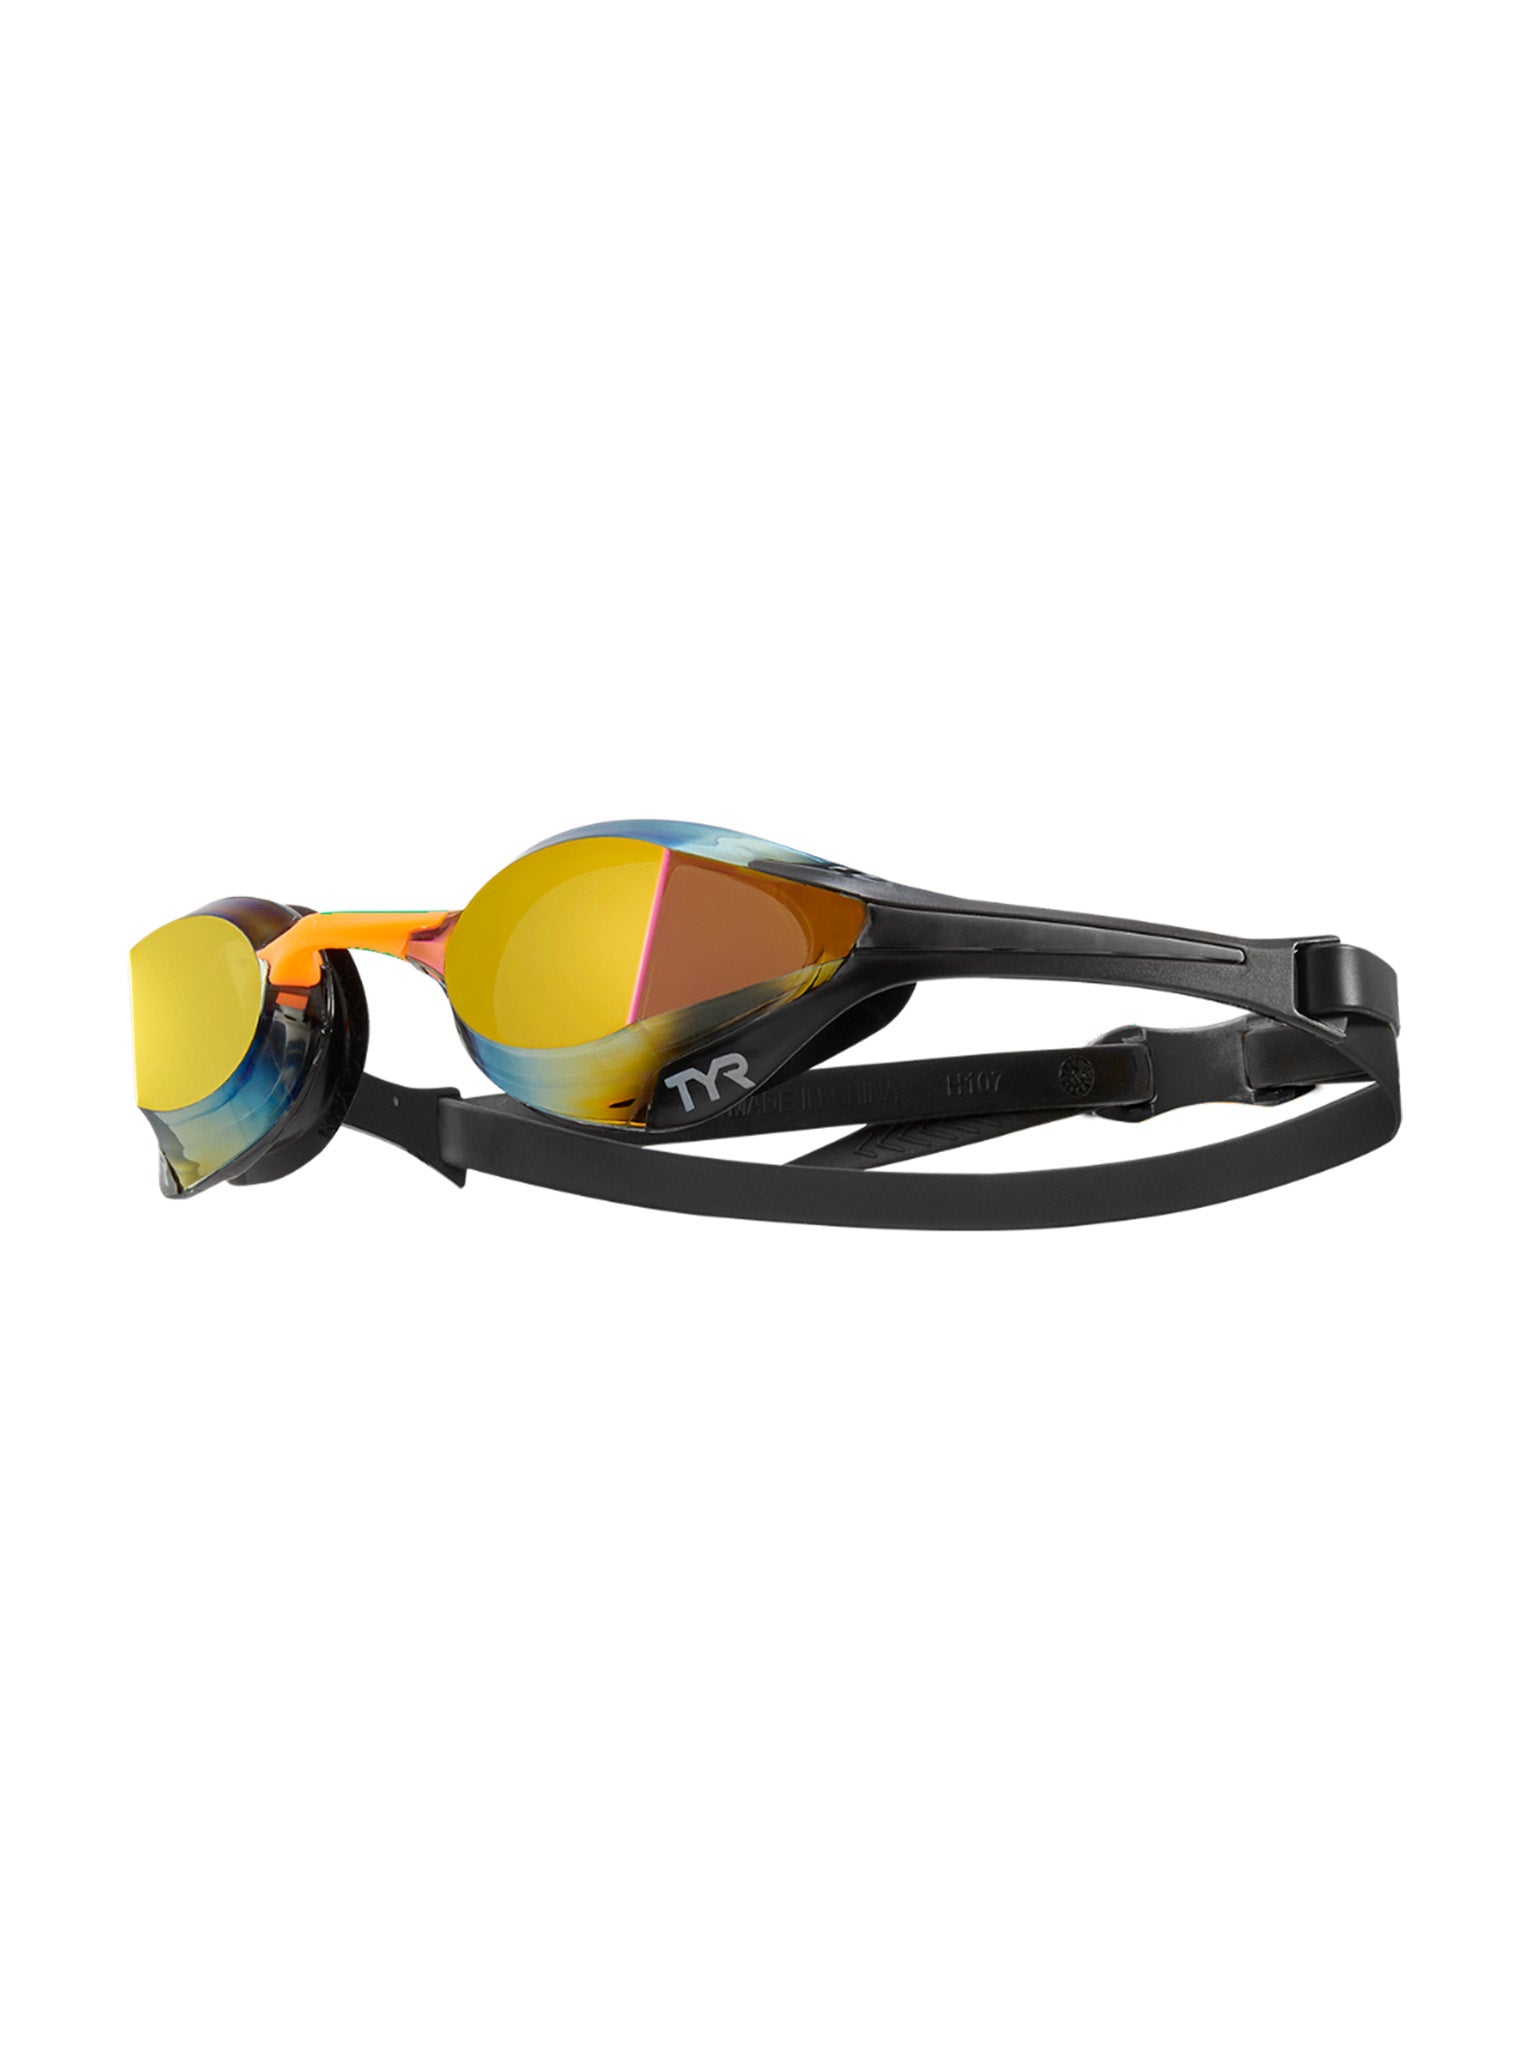 TYR Tracer-X Elite Racing Goggles Mirrored